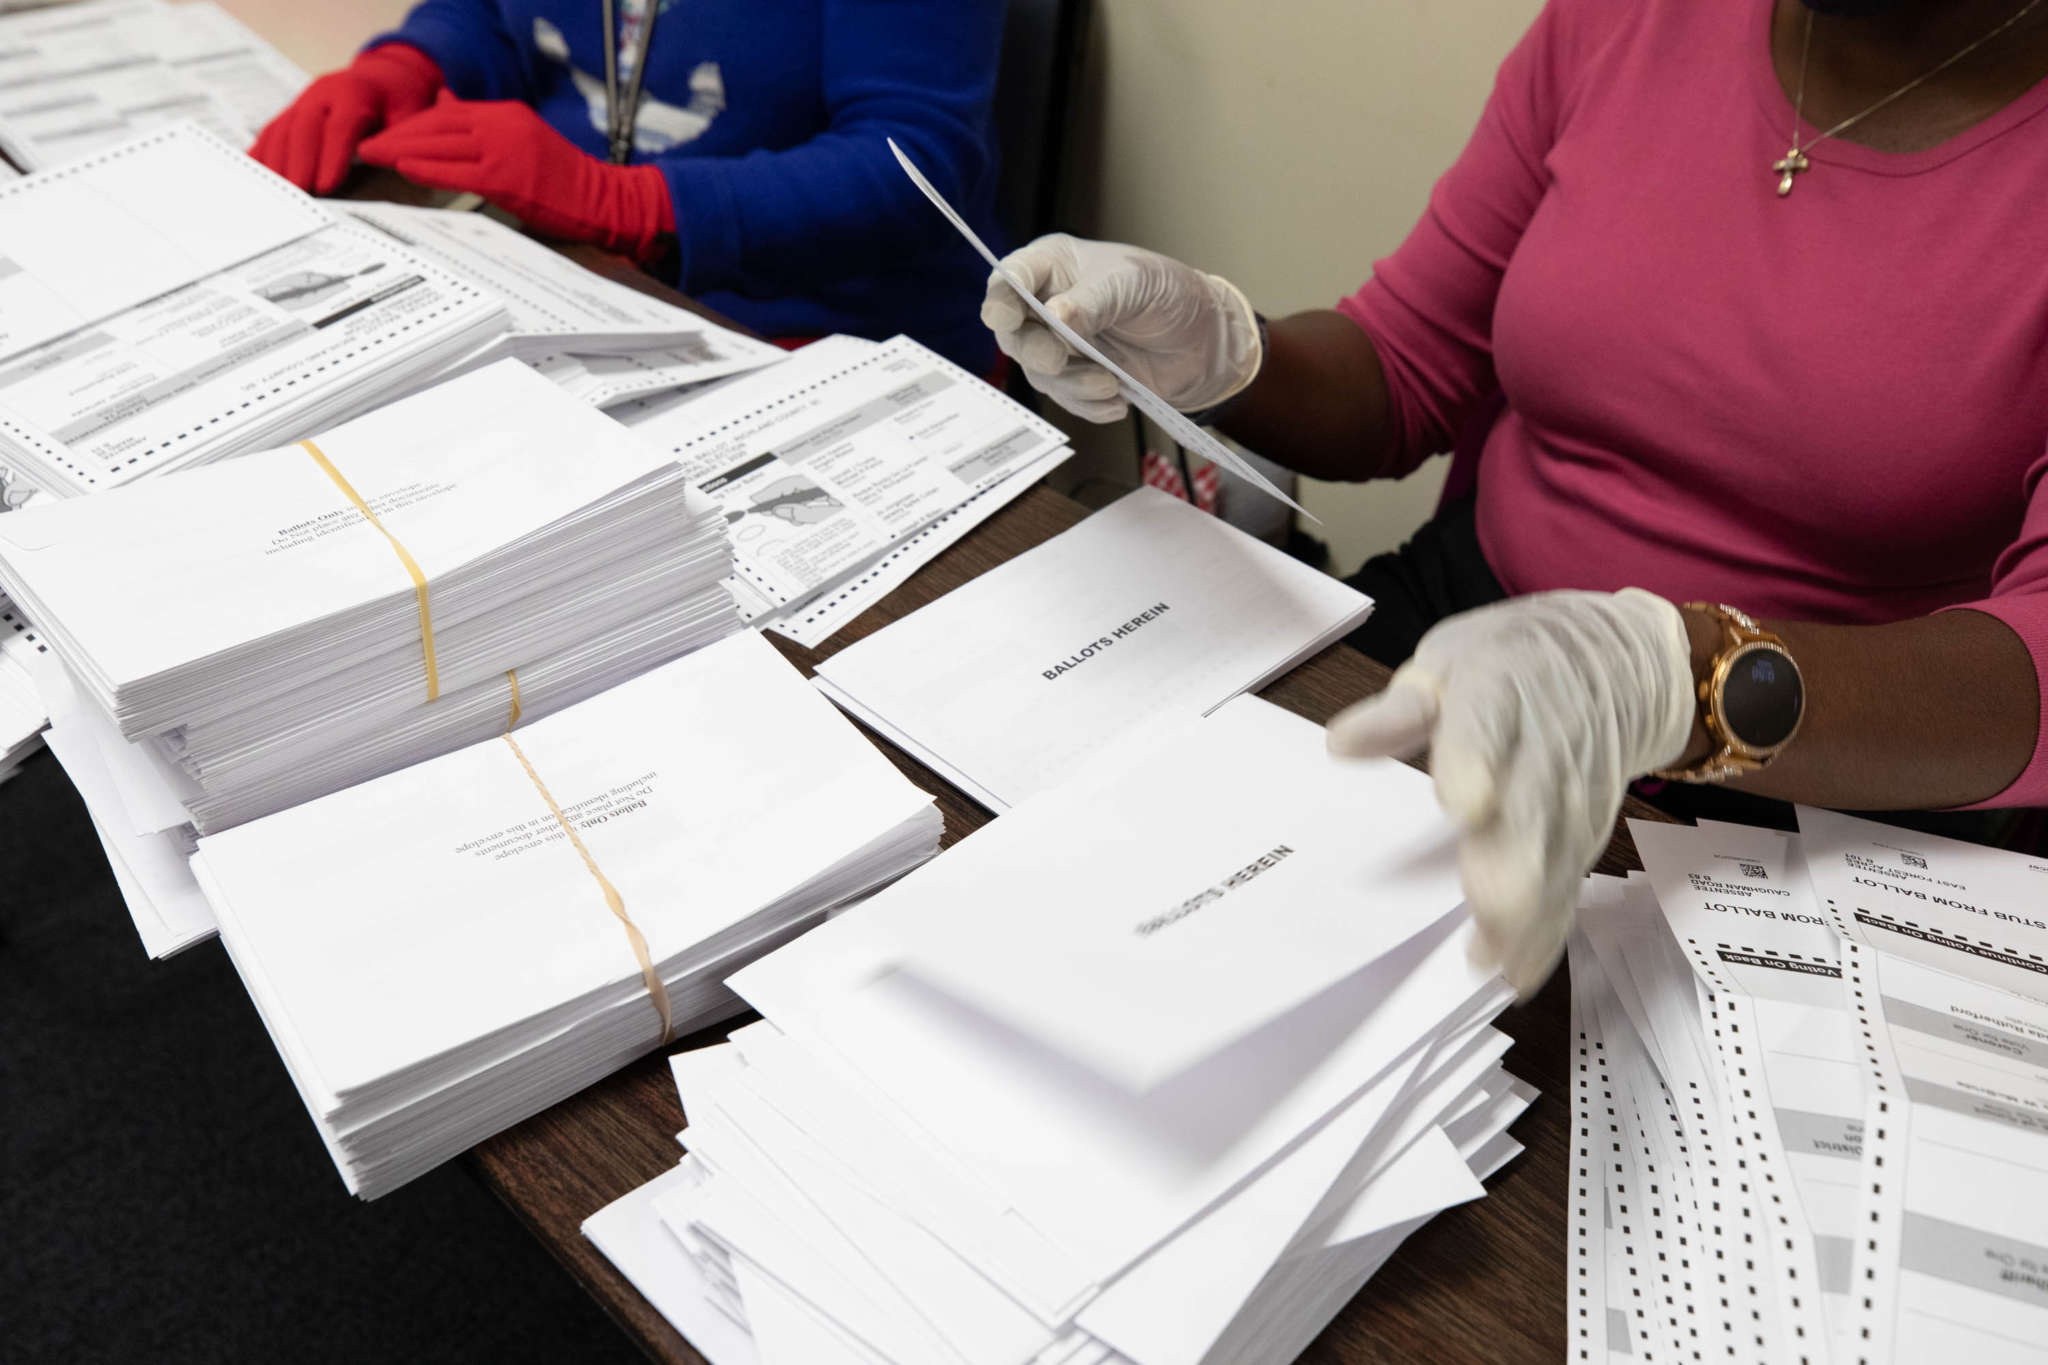 Paper Ballots Played a Key Role in Defending the Integrity of the 2020